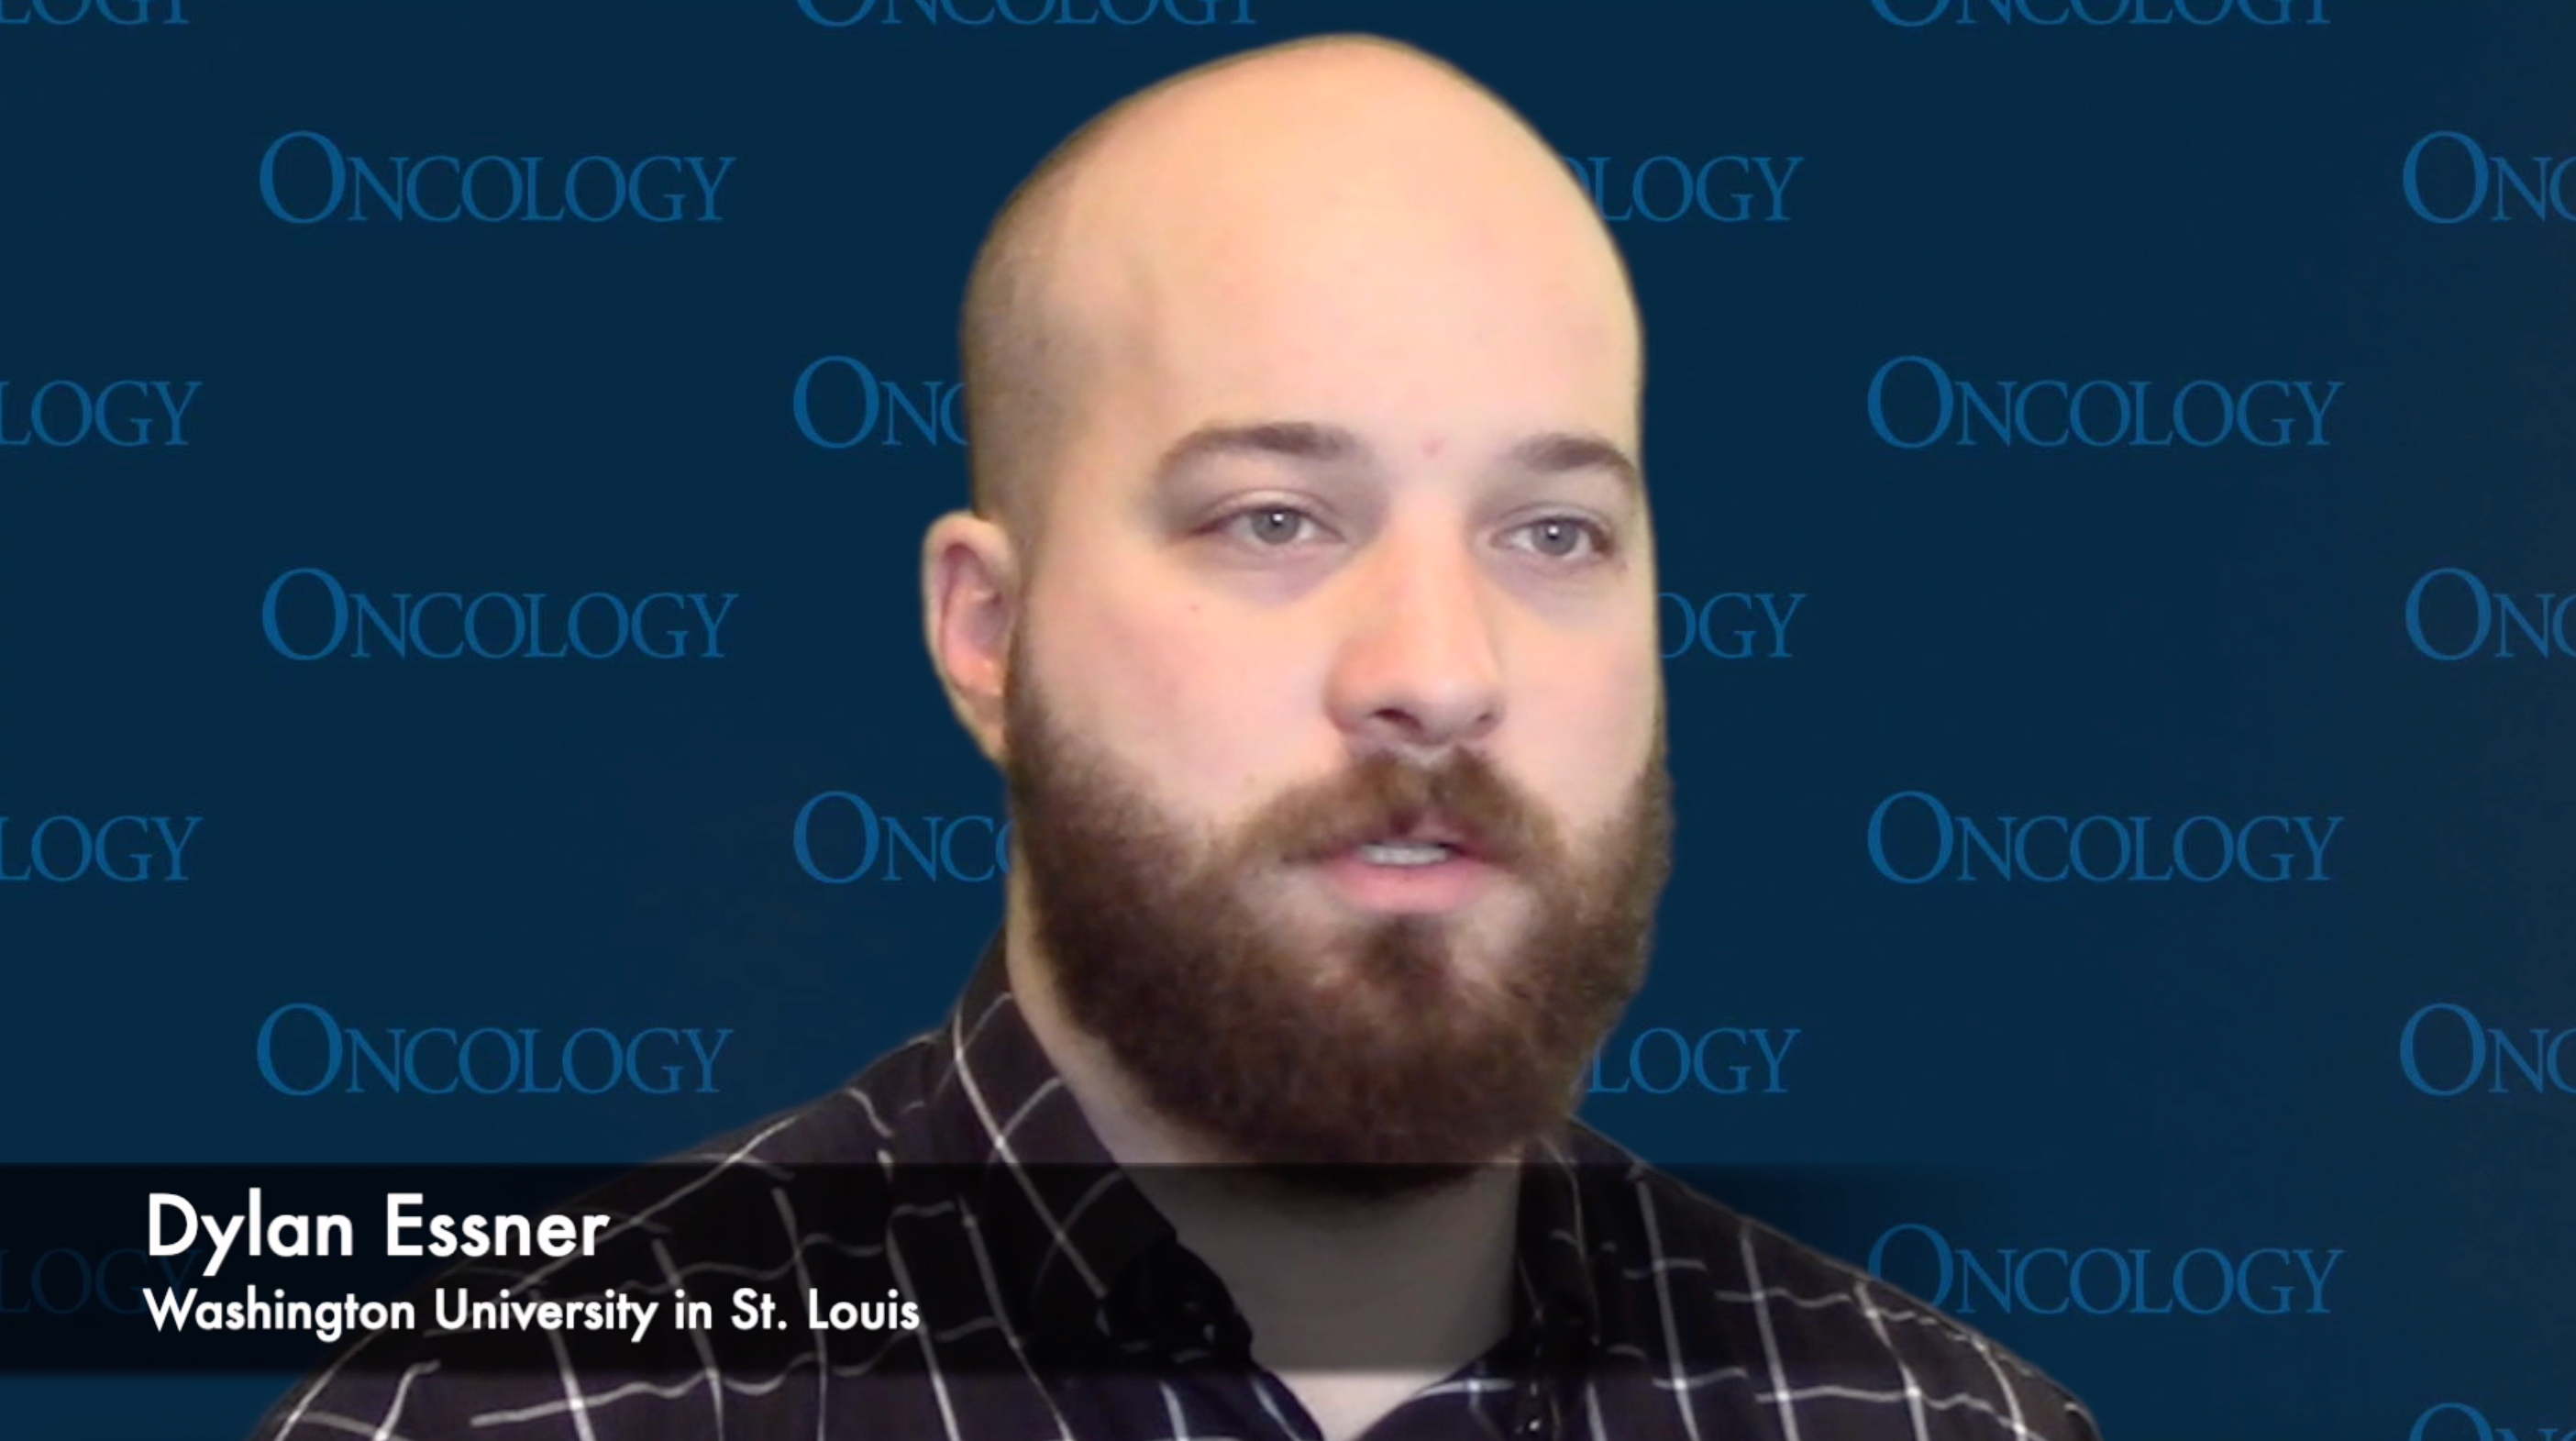 Dylan Essner on Documentation Tools for CAR T-Cell Therapy